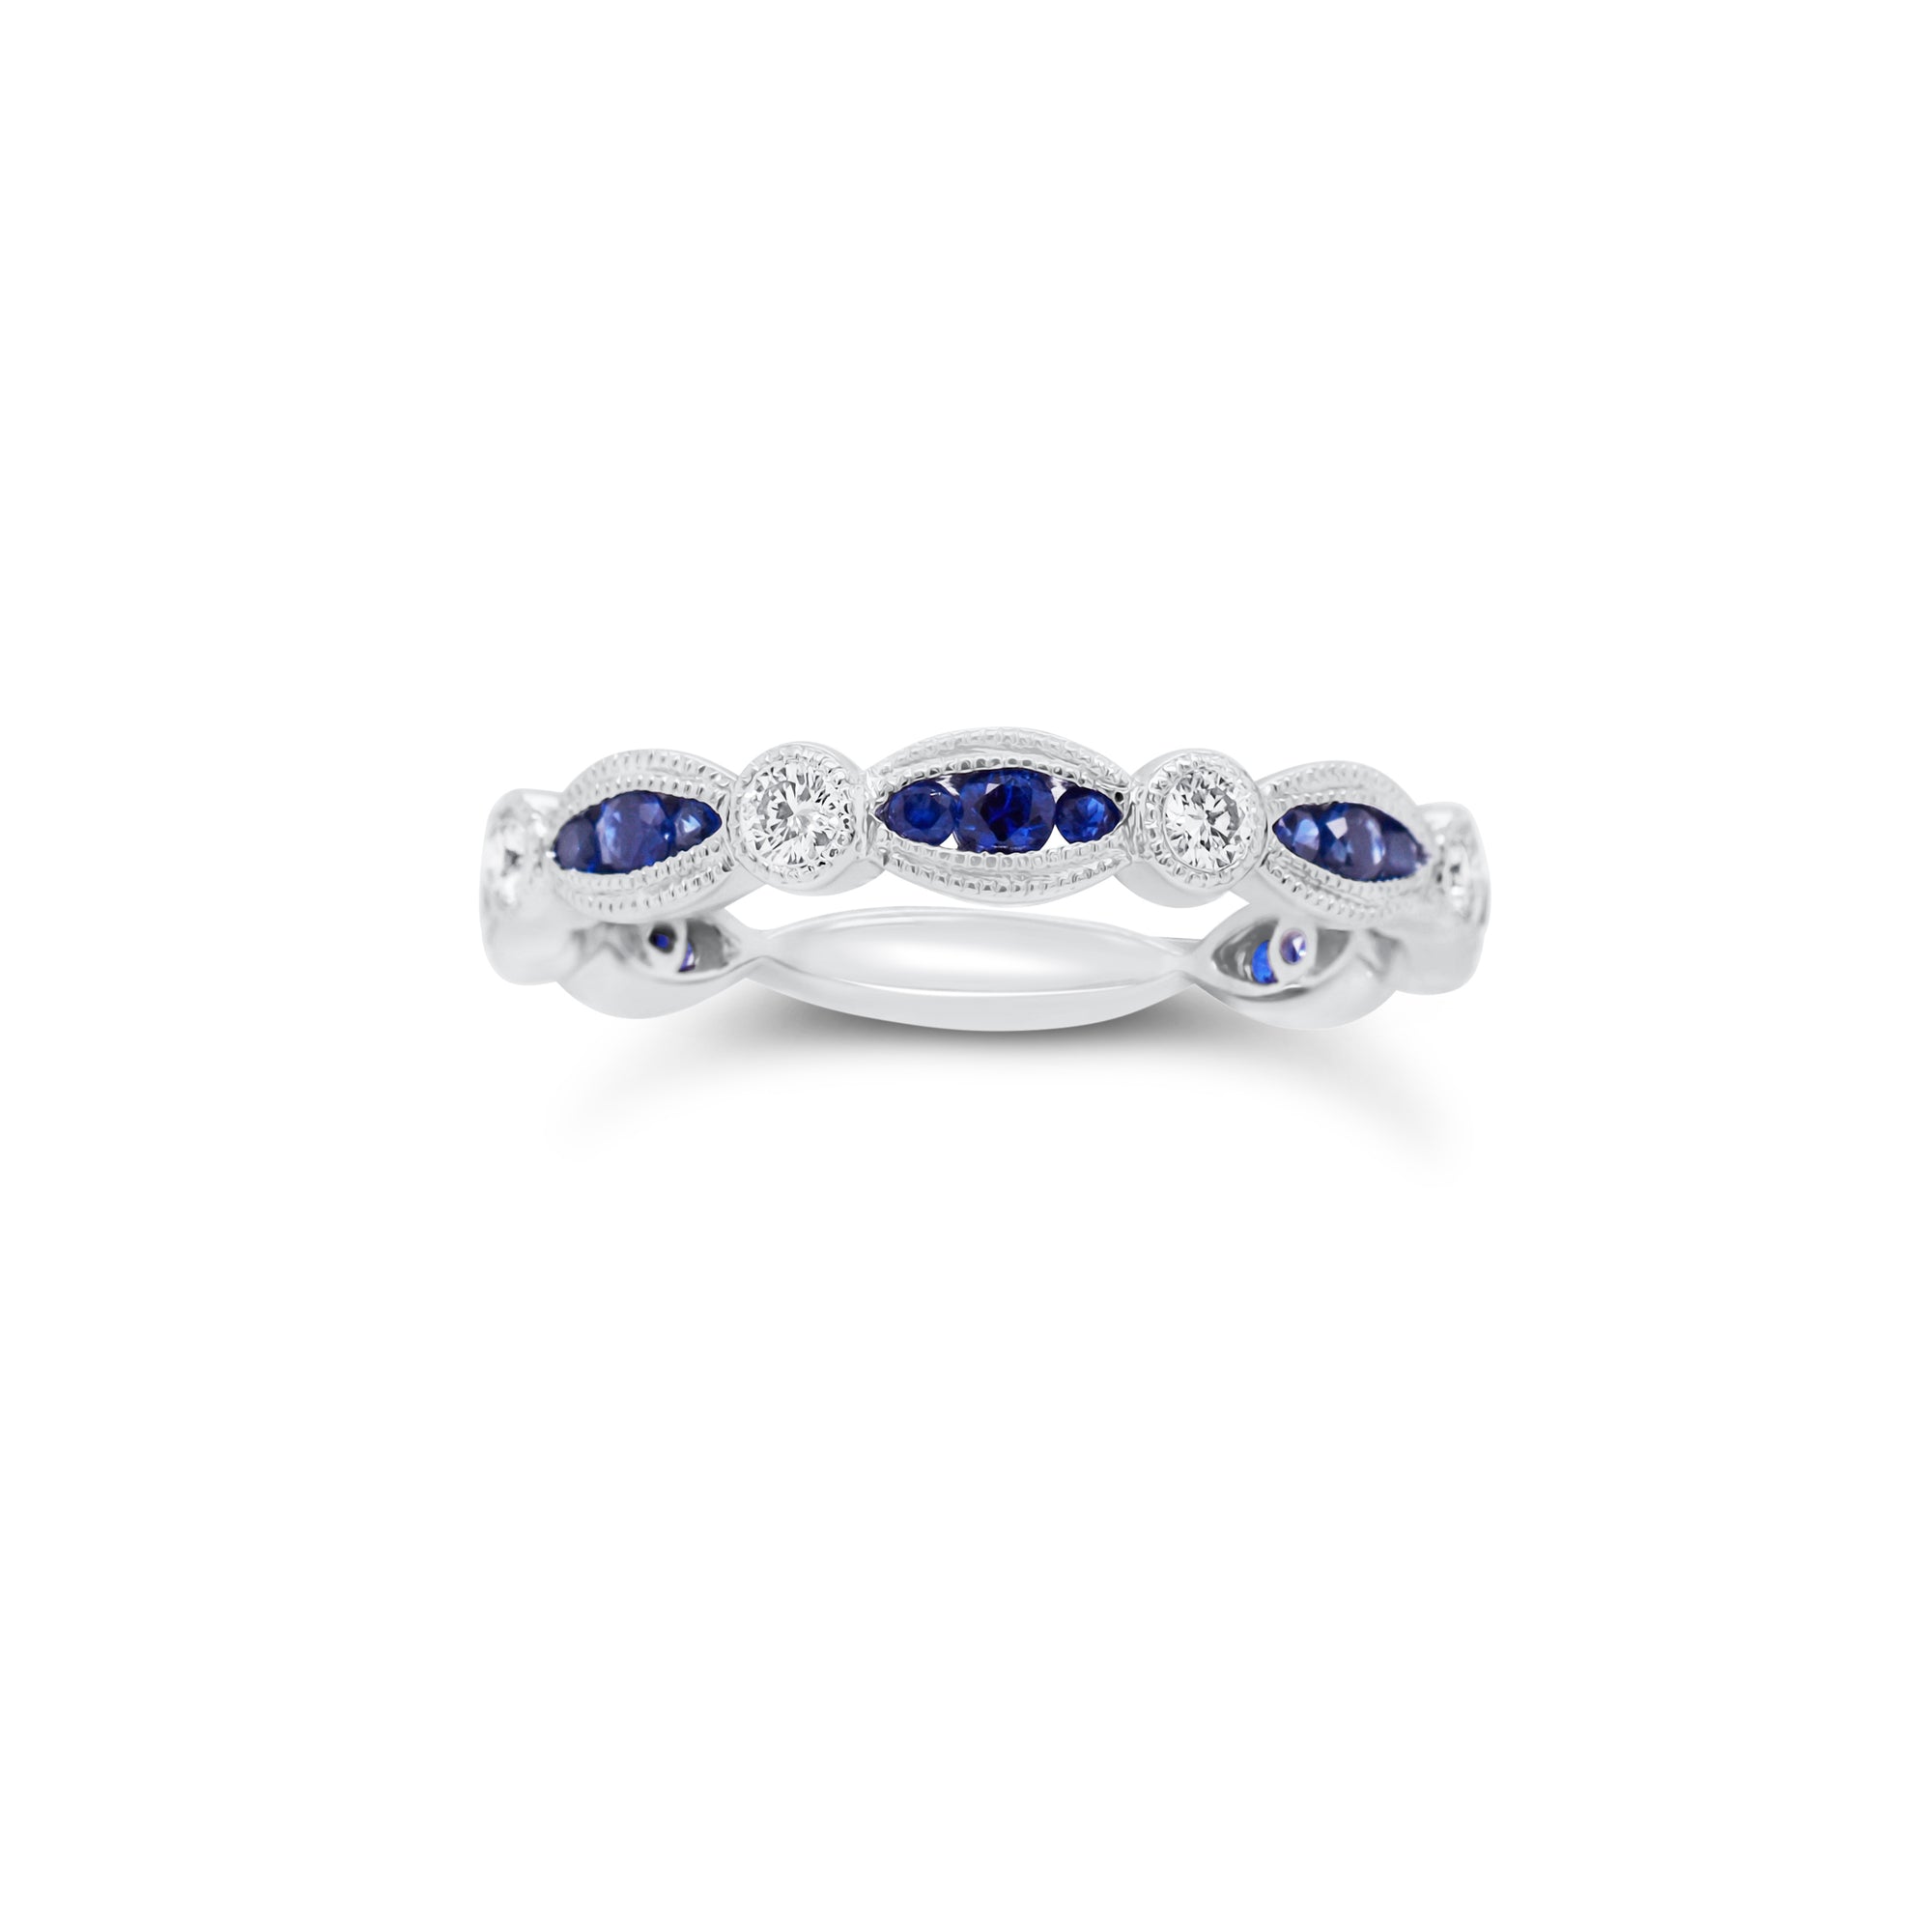 Sapphire and Diamond Stackable Ring - 18K gold weighing 2.50 grams  - 6 round diamonds totaling 0.18 carats  - 21 sapphires totaling 0.39 carats